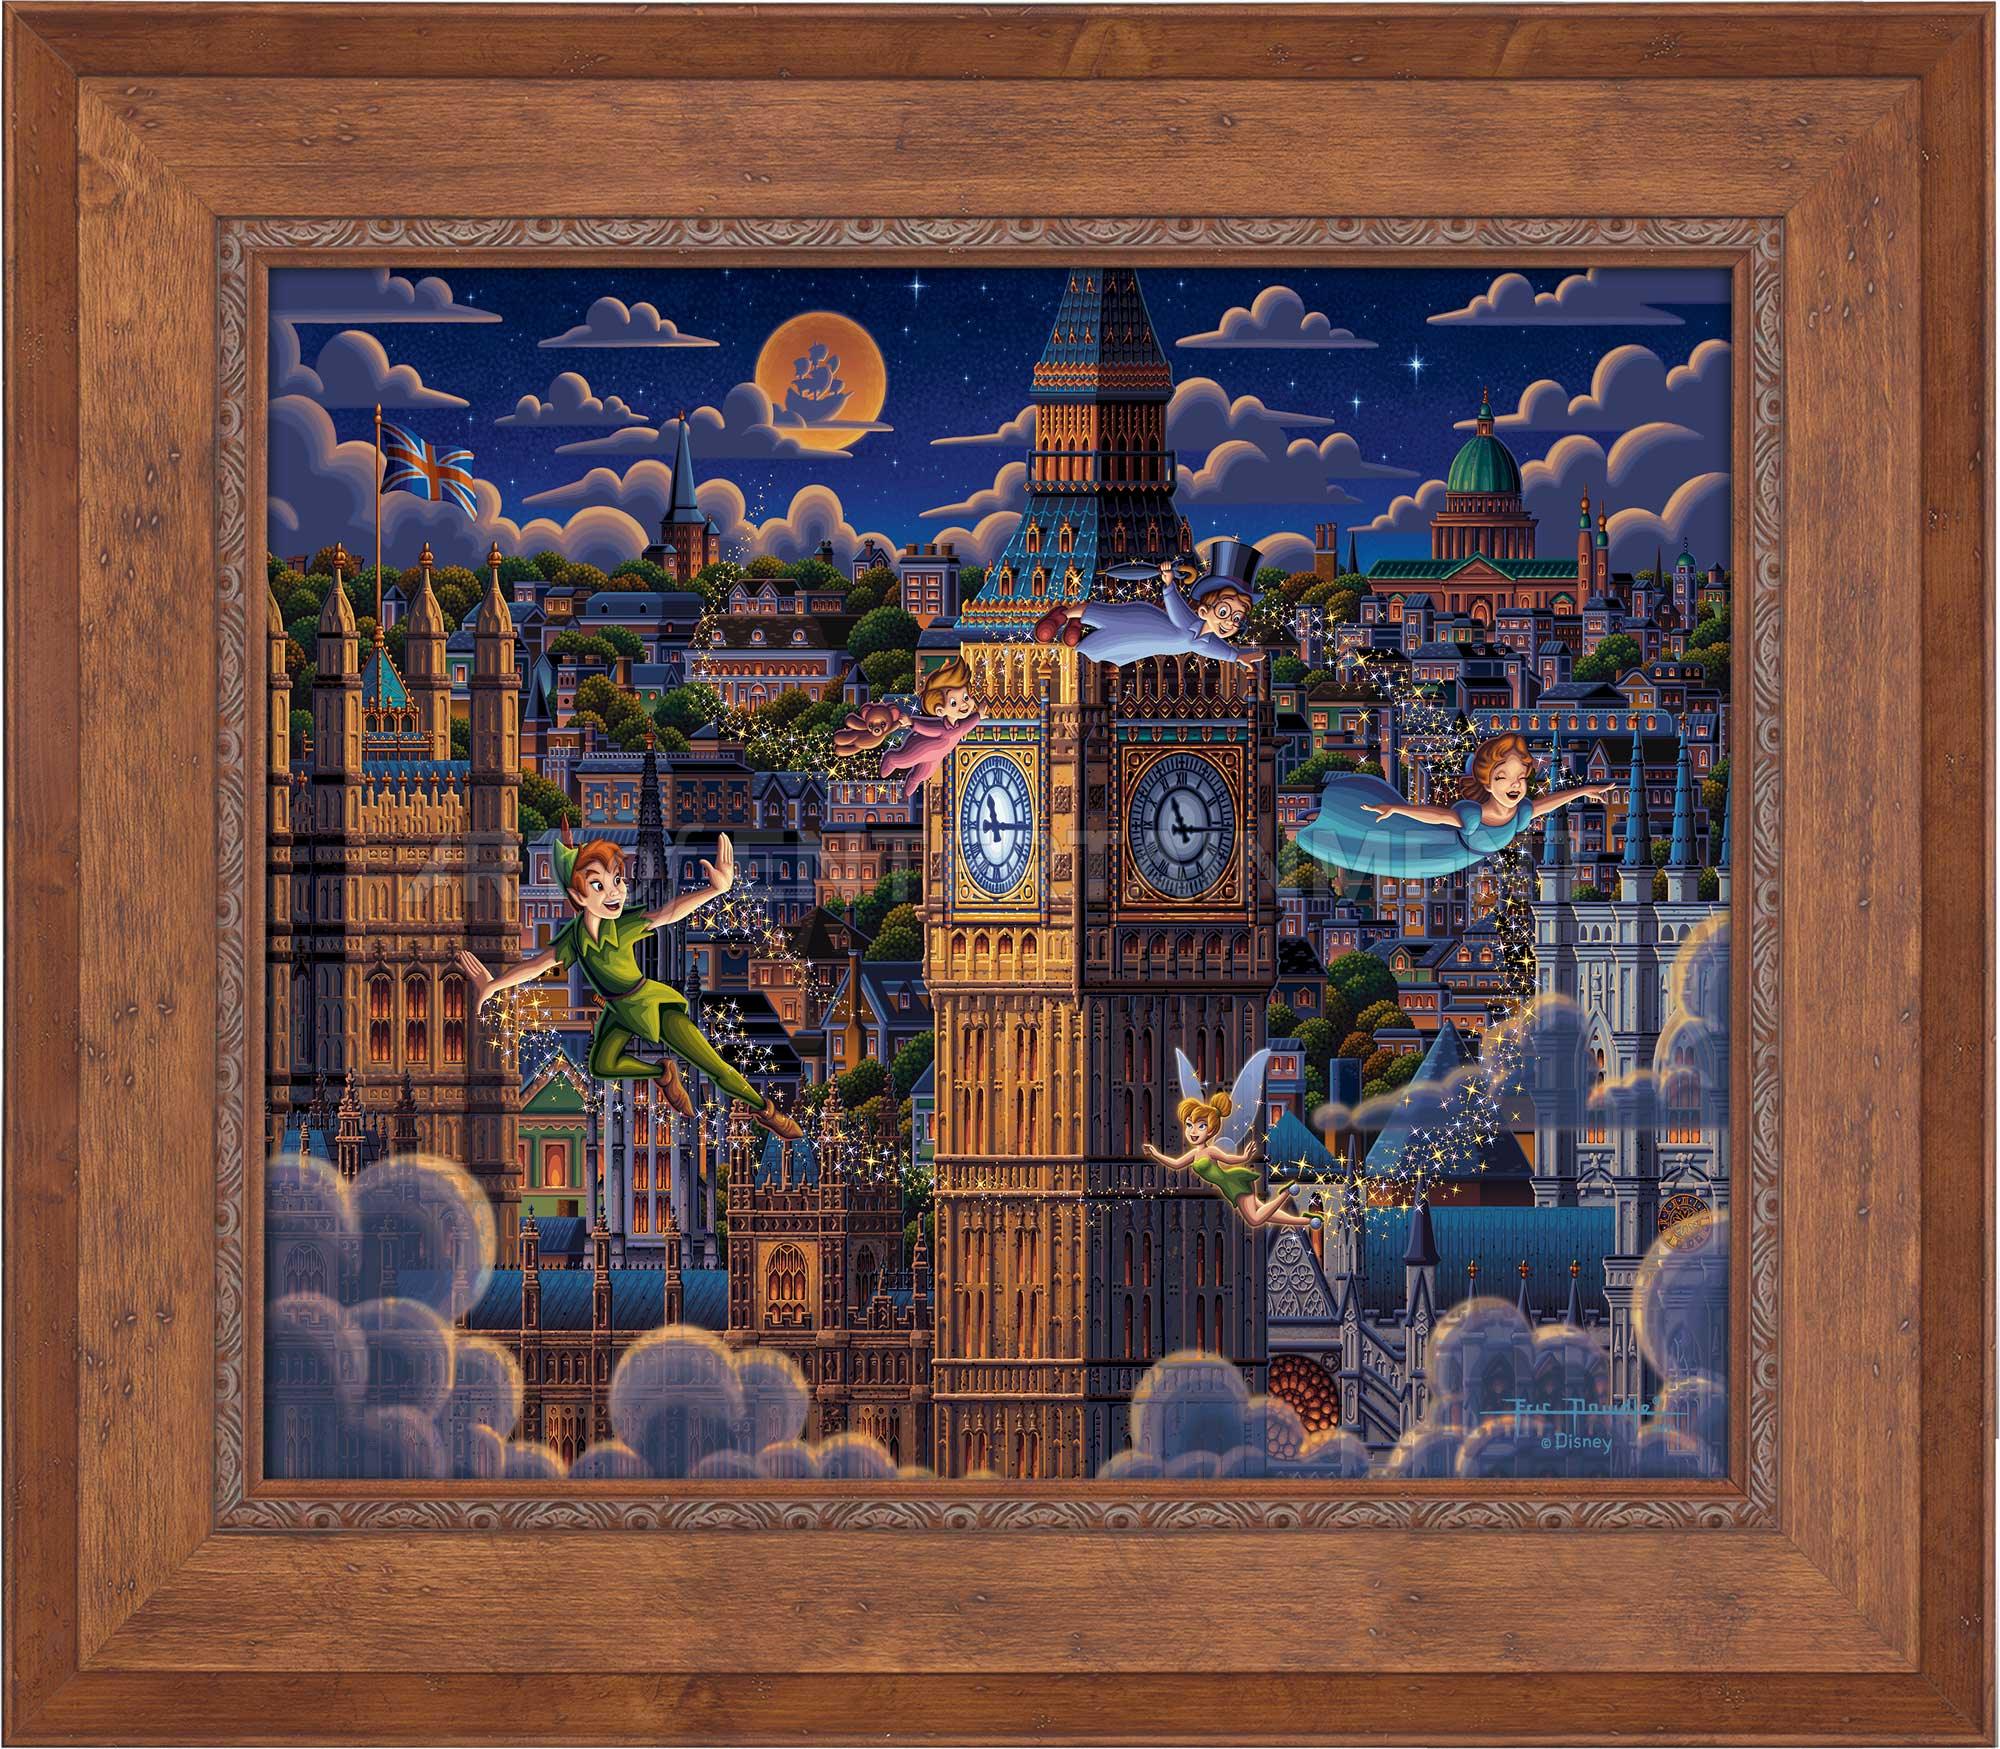 Peter Pan Learning to Fly - Limited Edition Canvas (SN - Standard Numbered) - Art Of Entertainment